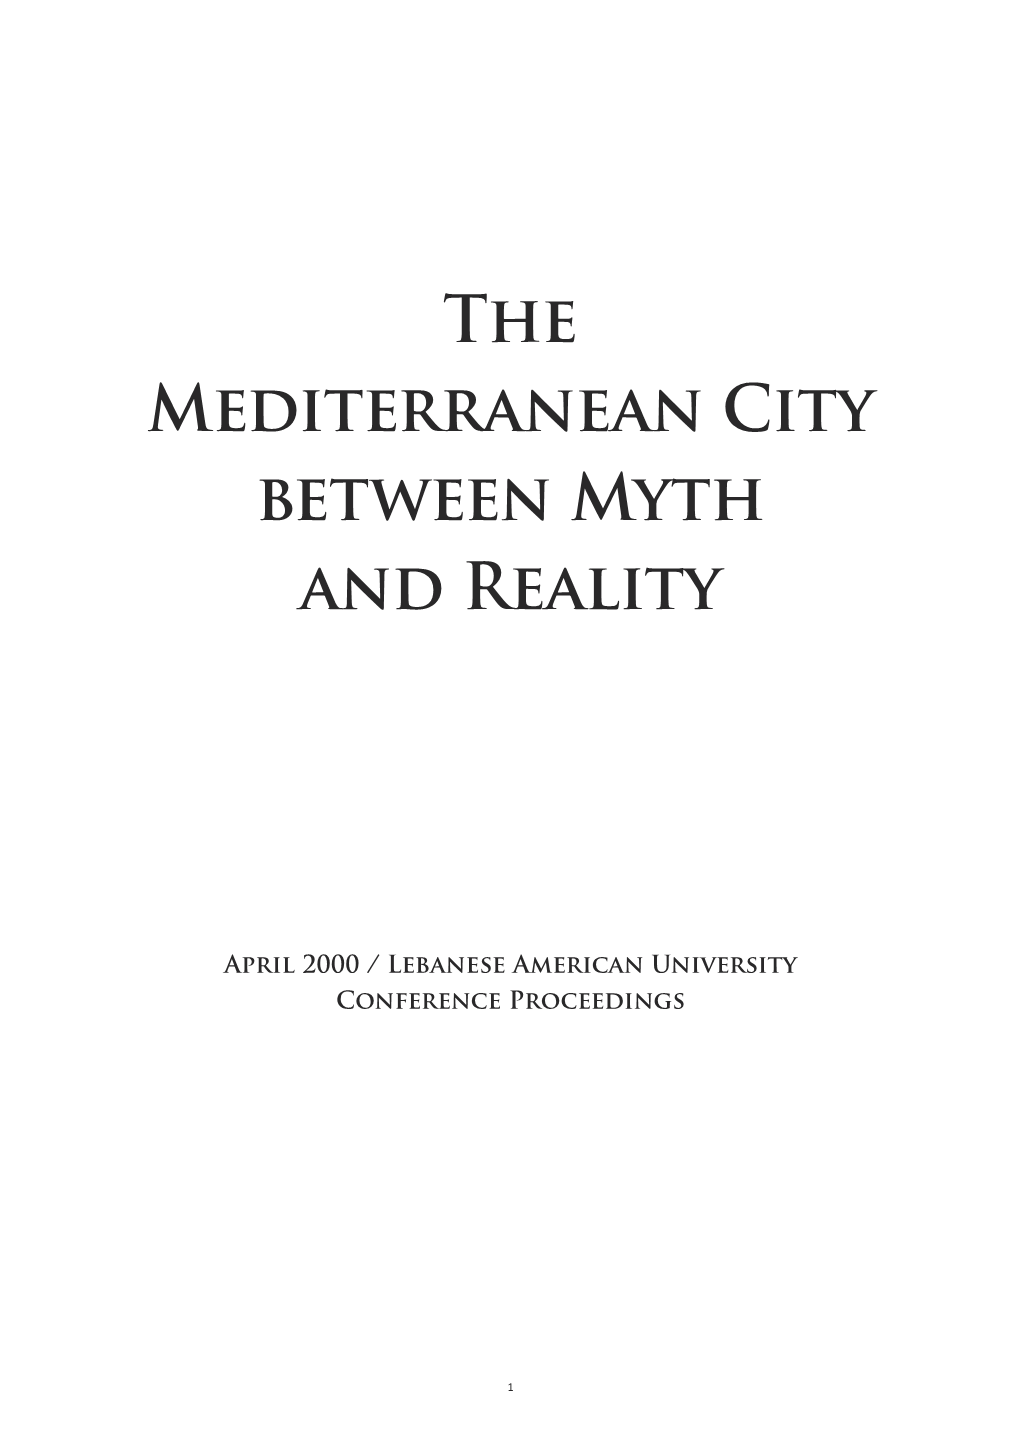 The Mediterranean City Between Myth and Reality